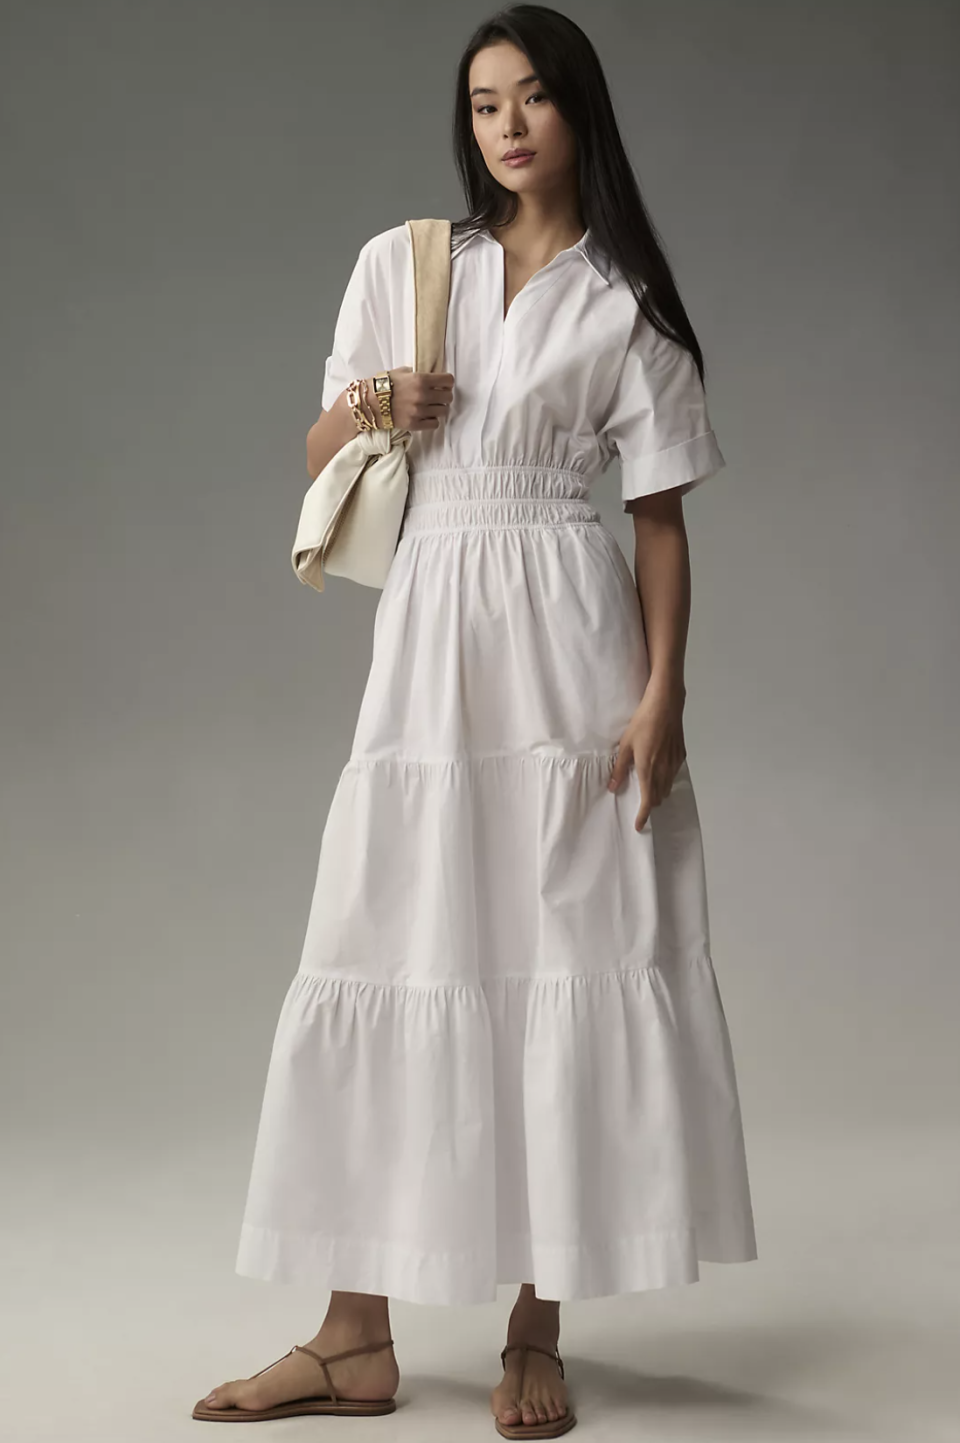 The Somerset Maxi Dress: Shirt Dress Edition in white (Photo via Anthropologie)